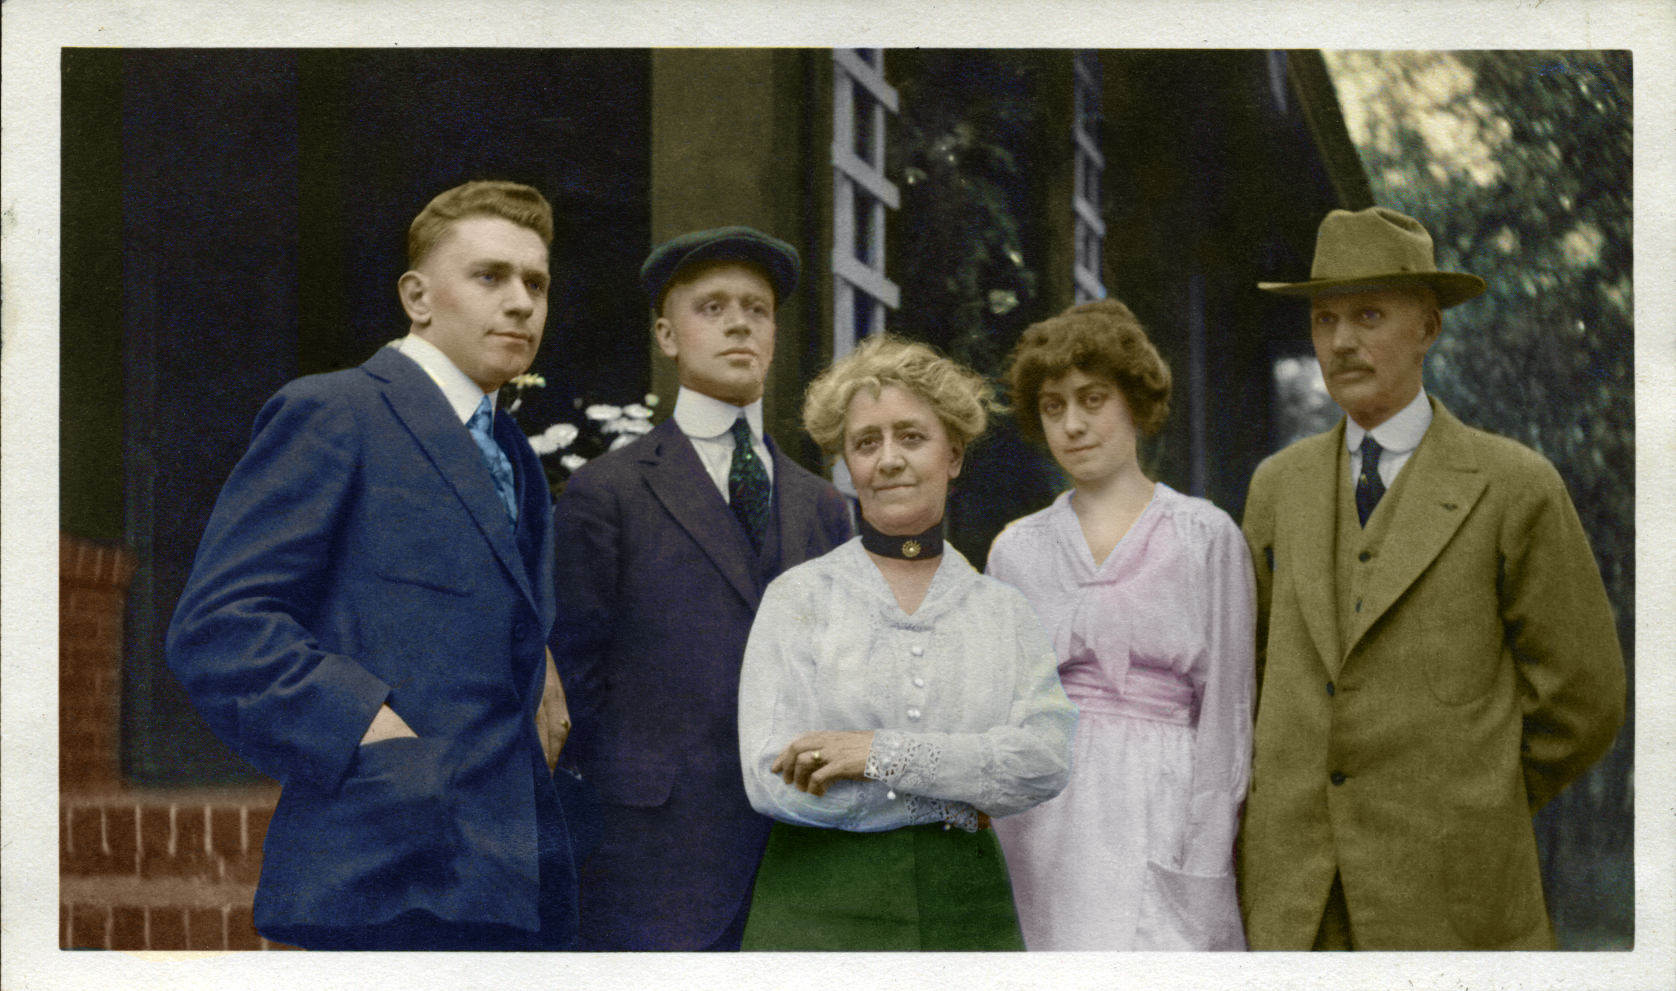 The C.W. Jenne Family, 1919, Elgin, IL. Colorized from a black and white image. From Left to Right: Donald Dickinson Jenne (Grandpa), Paul Jenne, Agnes, Marguerite, CW (Charles William). View full size.